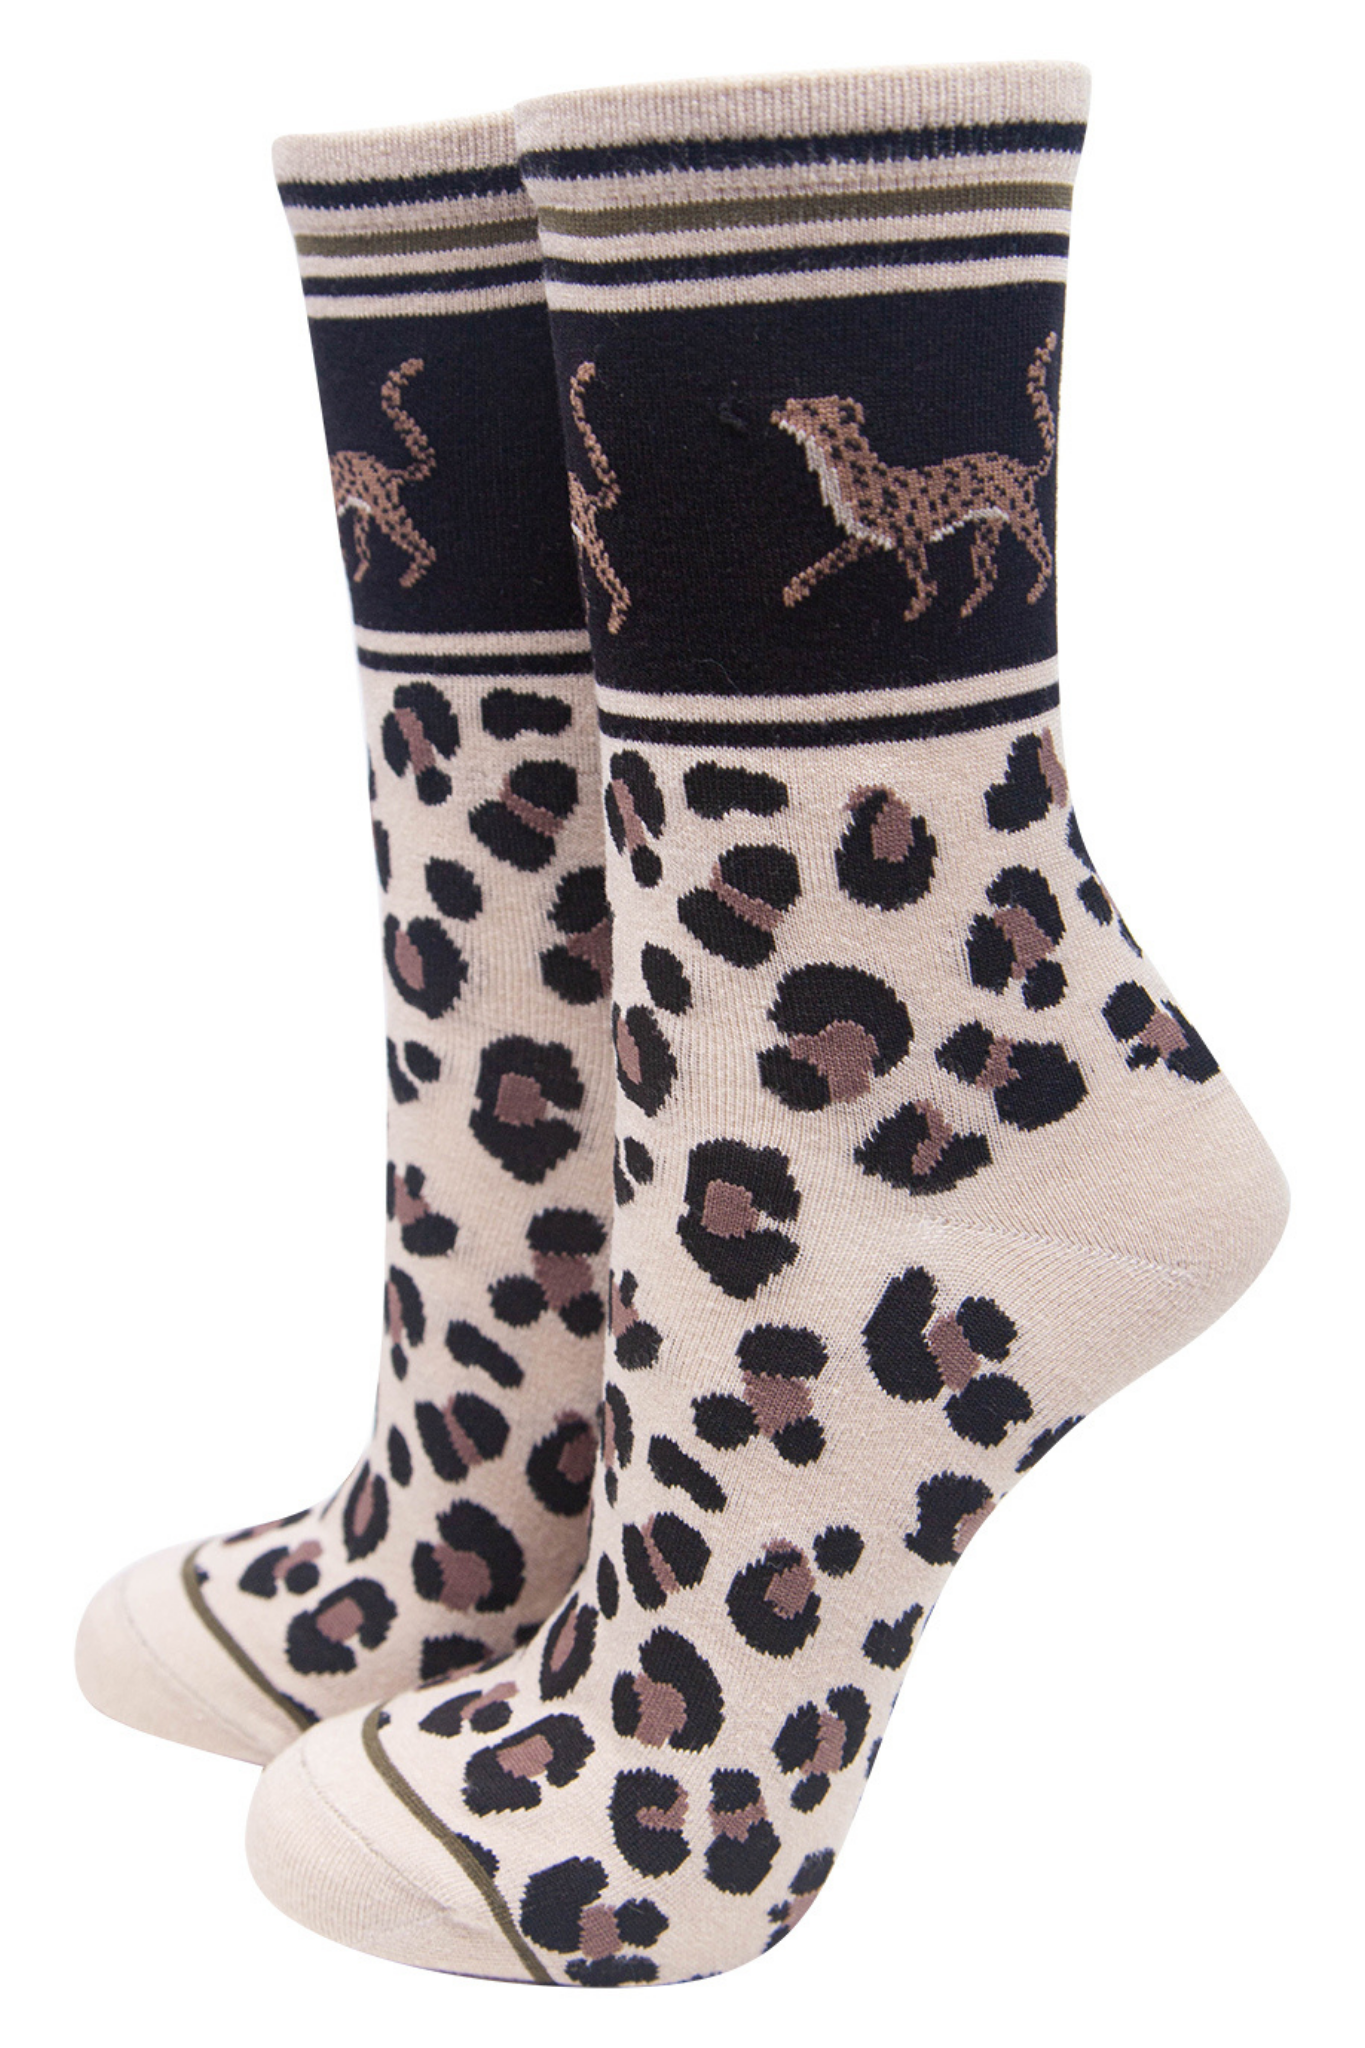 cream and beige cheetah print ankle socks with cheetah cats around the ankles